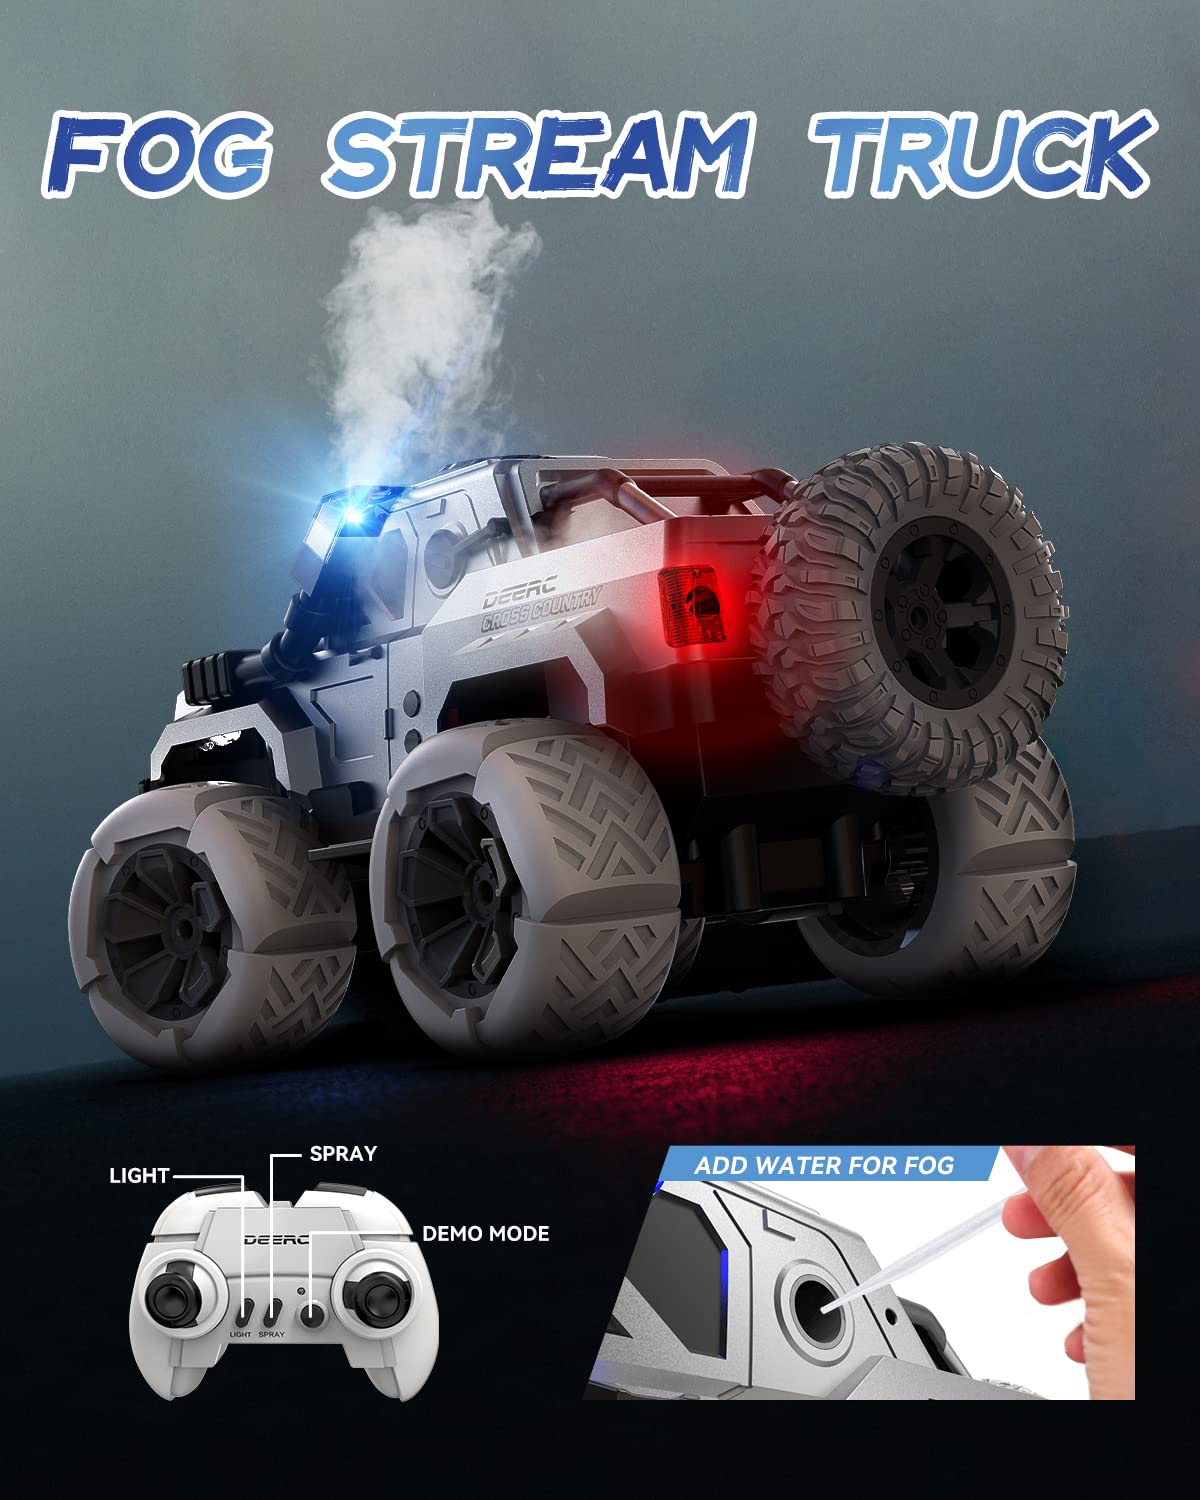 DEERC DE68 Remote Control Truck, RC Car with Spray, Snorkel and LED Lights, 60+ Mins Playtime, Off Road SUV, All Terrain Rock Crawler, Toy Vehicle for Boys Girls and Adults